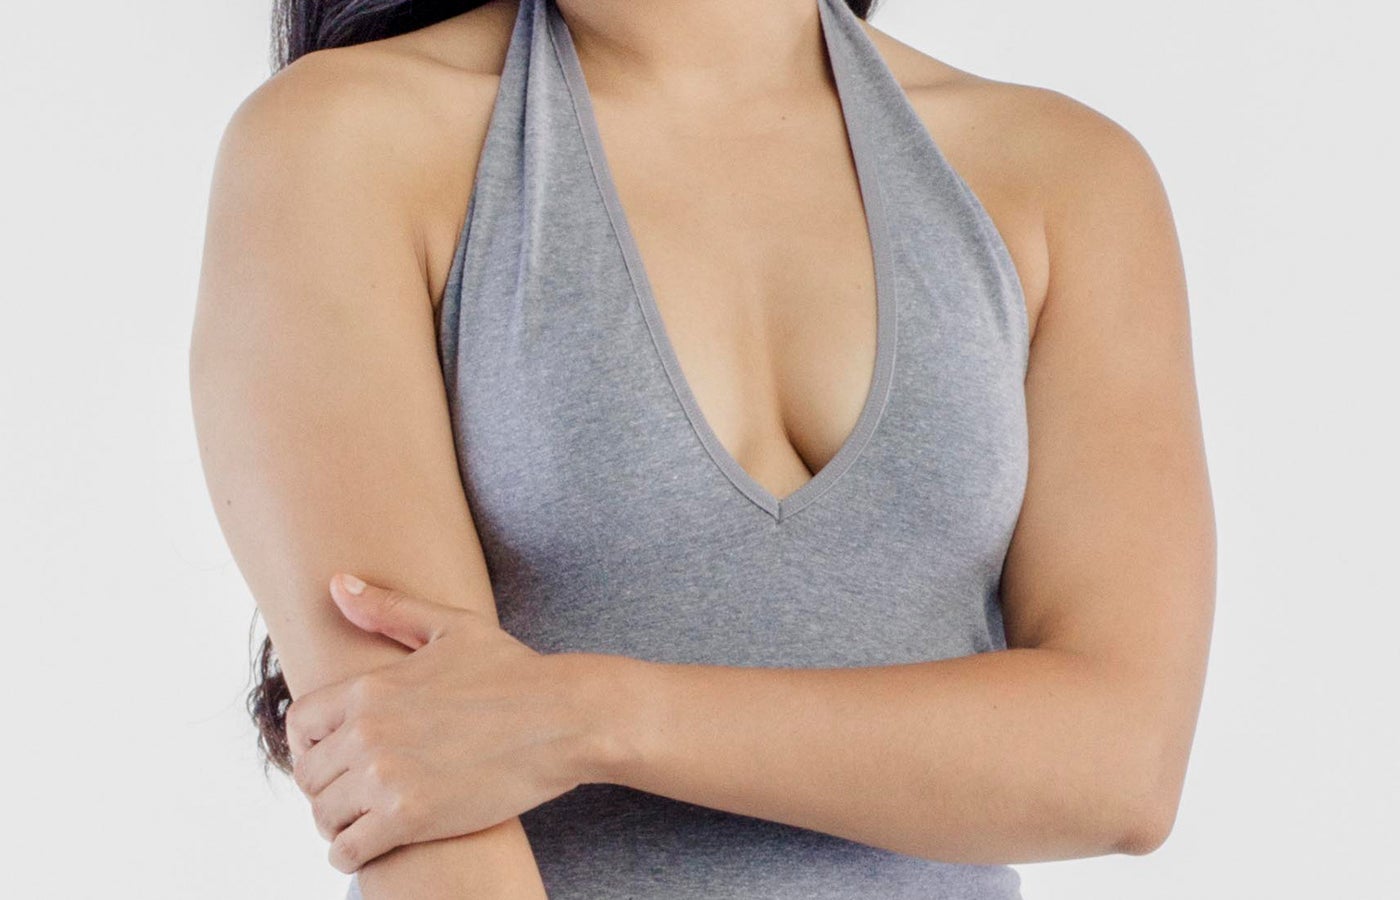 How Much Does Breast Reduction Cost Without Insurance?